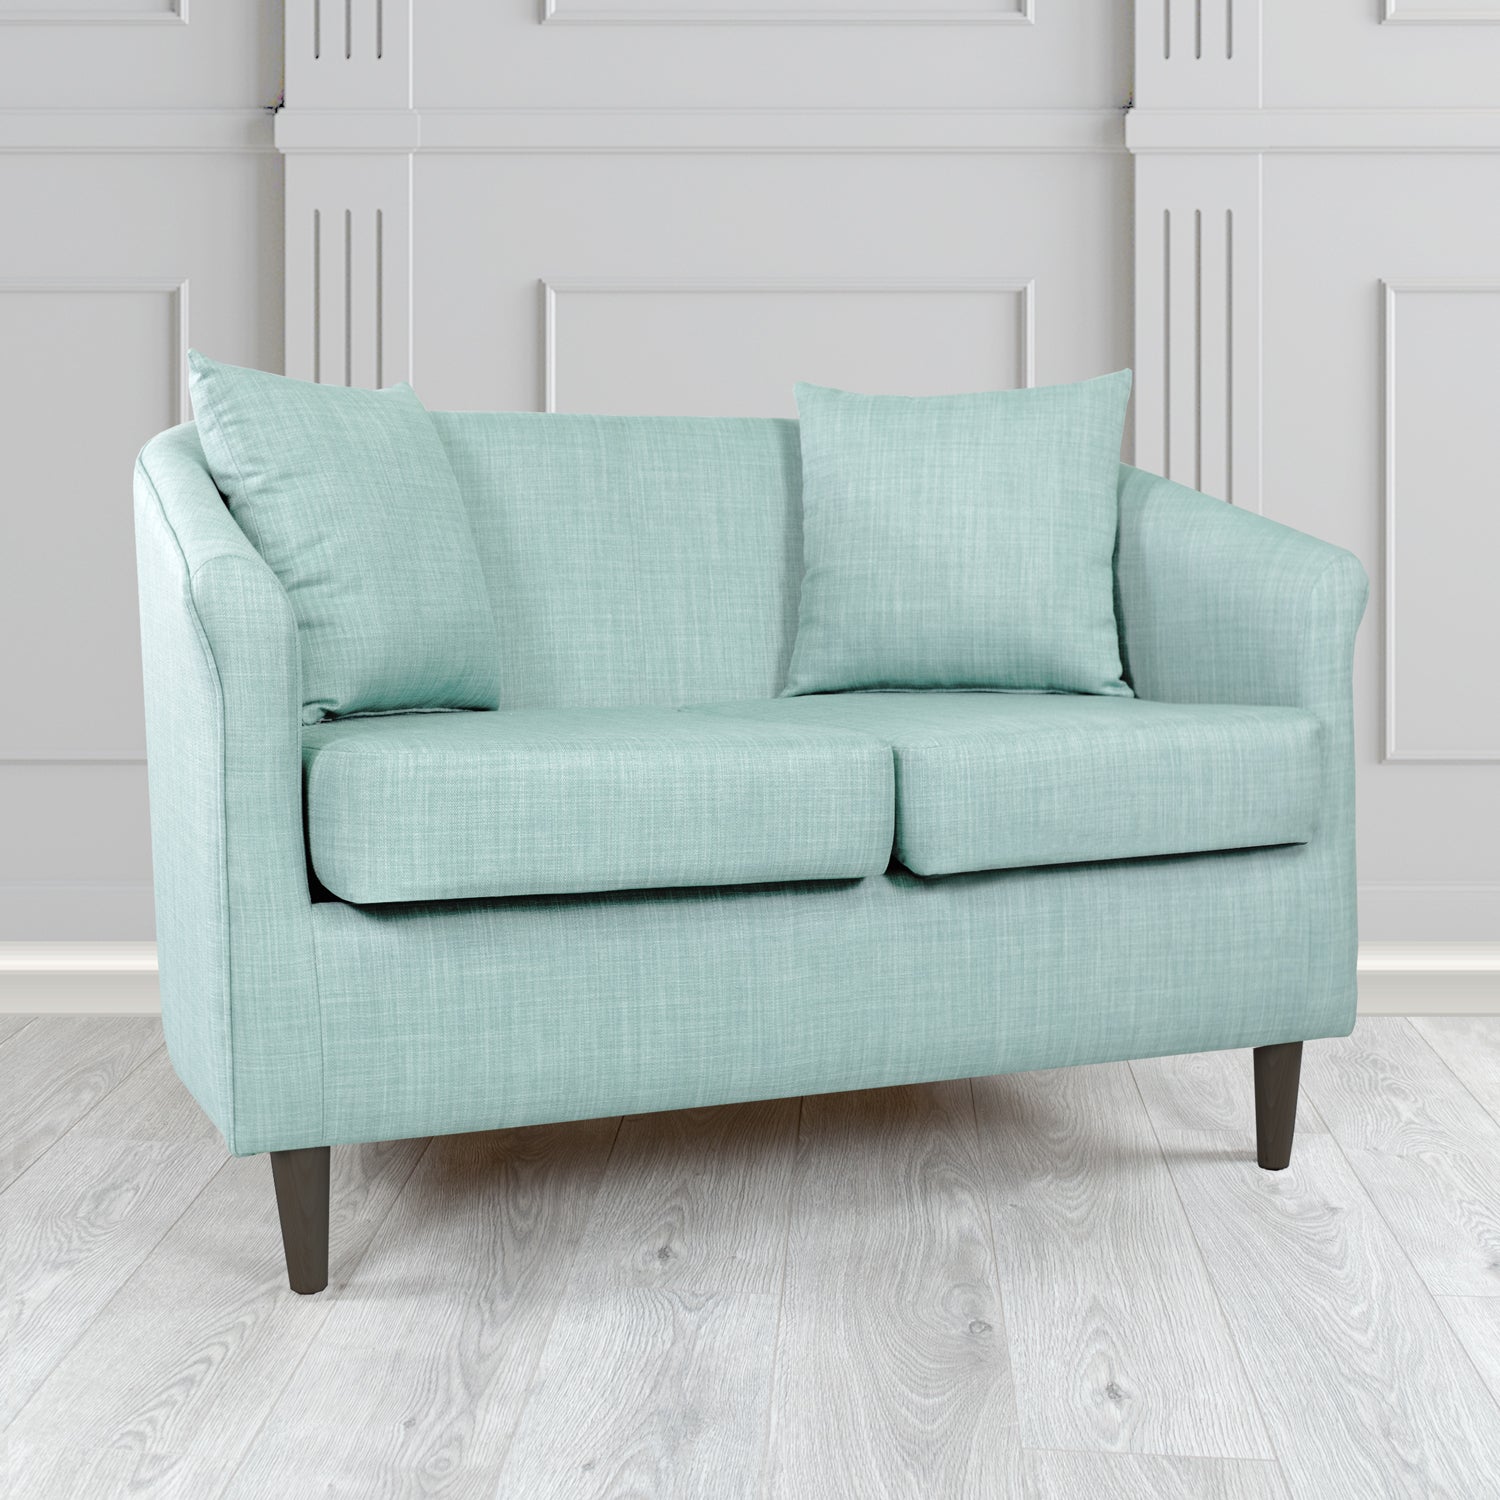 St Tropez Charles Sky Plain Linen Fabric 2 Seater Tub Sofa with Scatter Cushions - The Tub Chair Shop